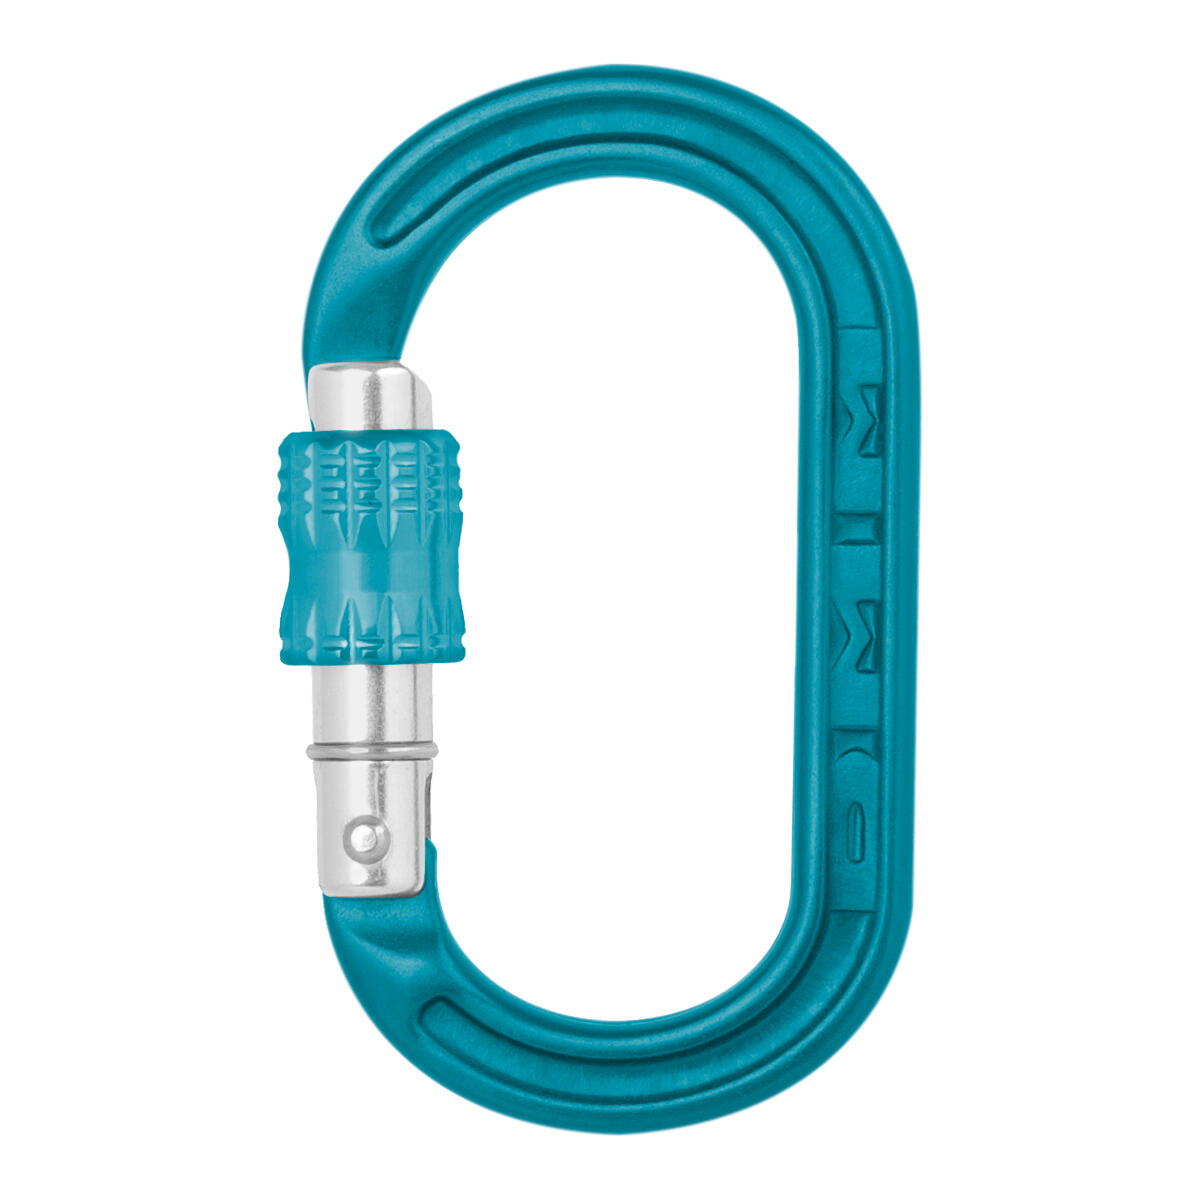 DMM XSRE Lock Accessory Carabiner - Turquoise